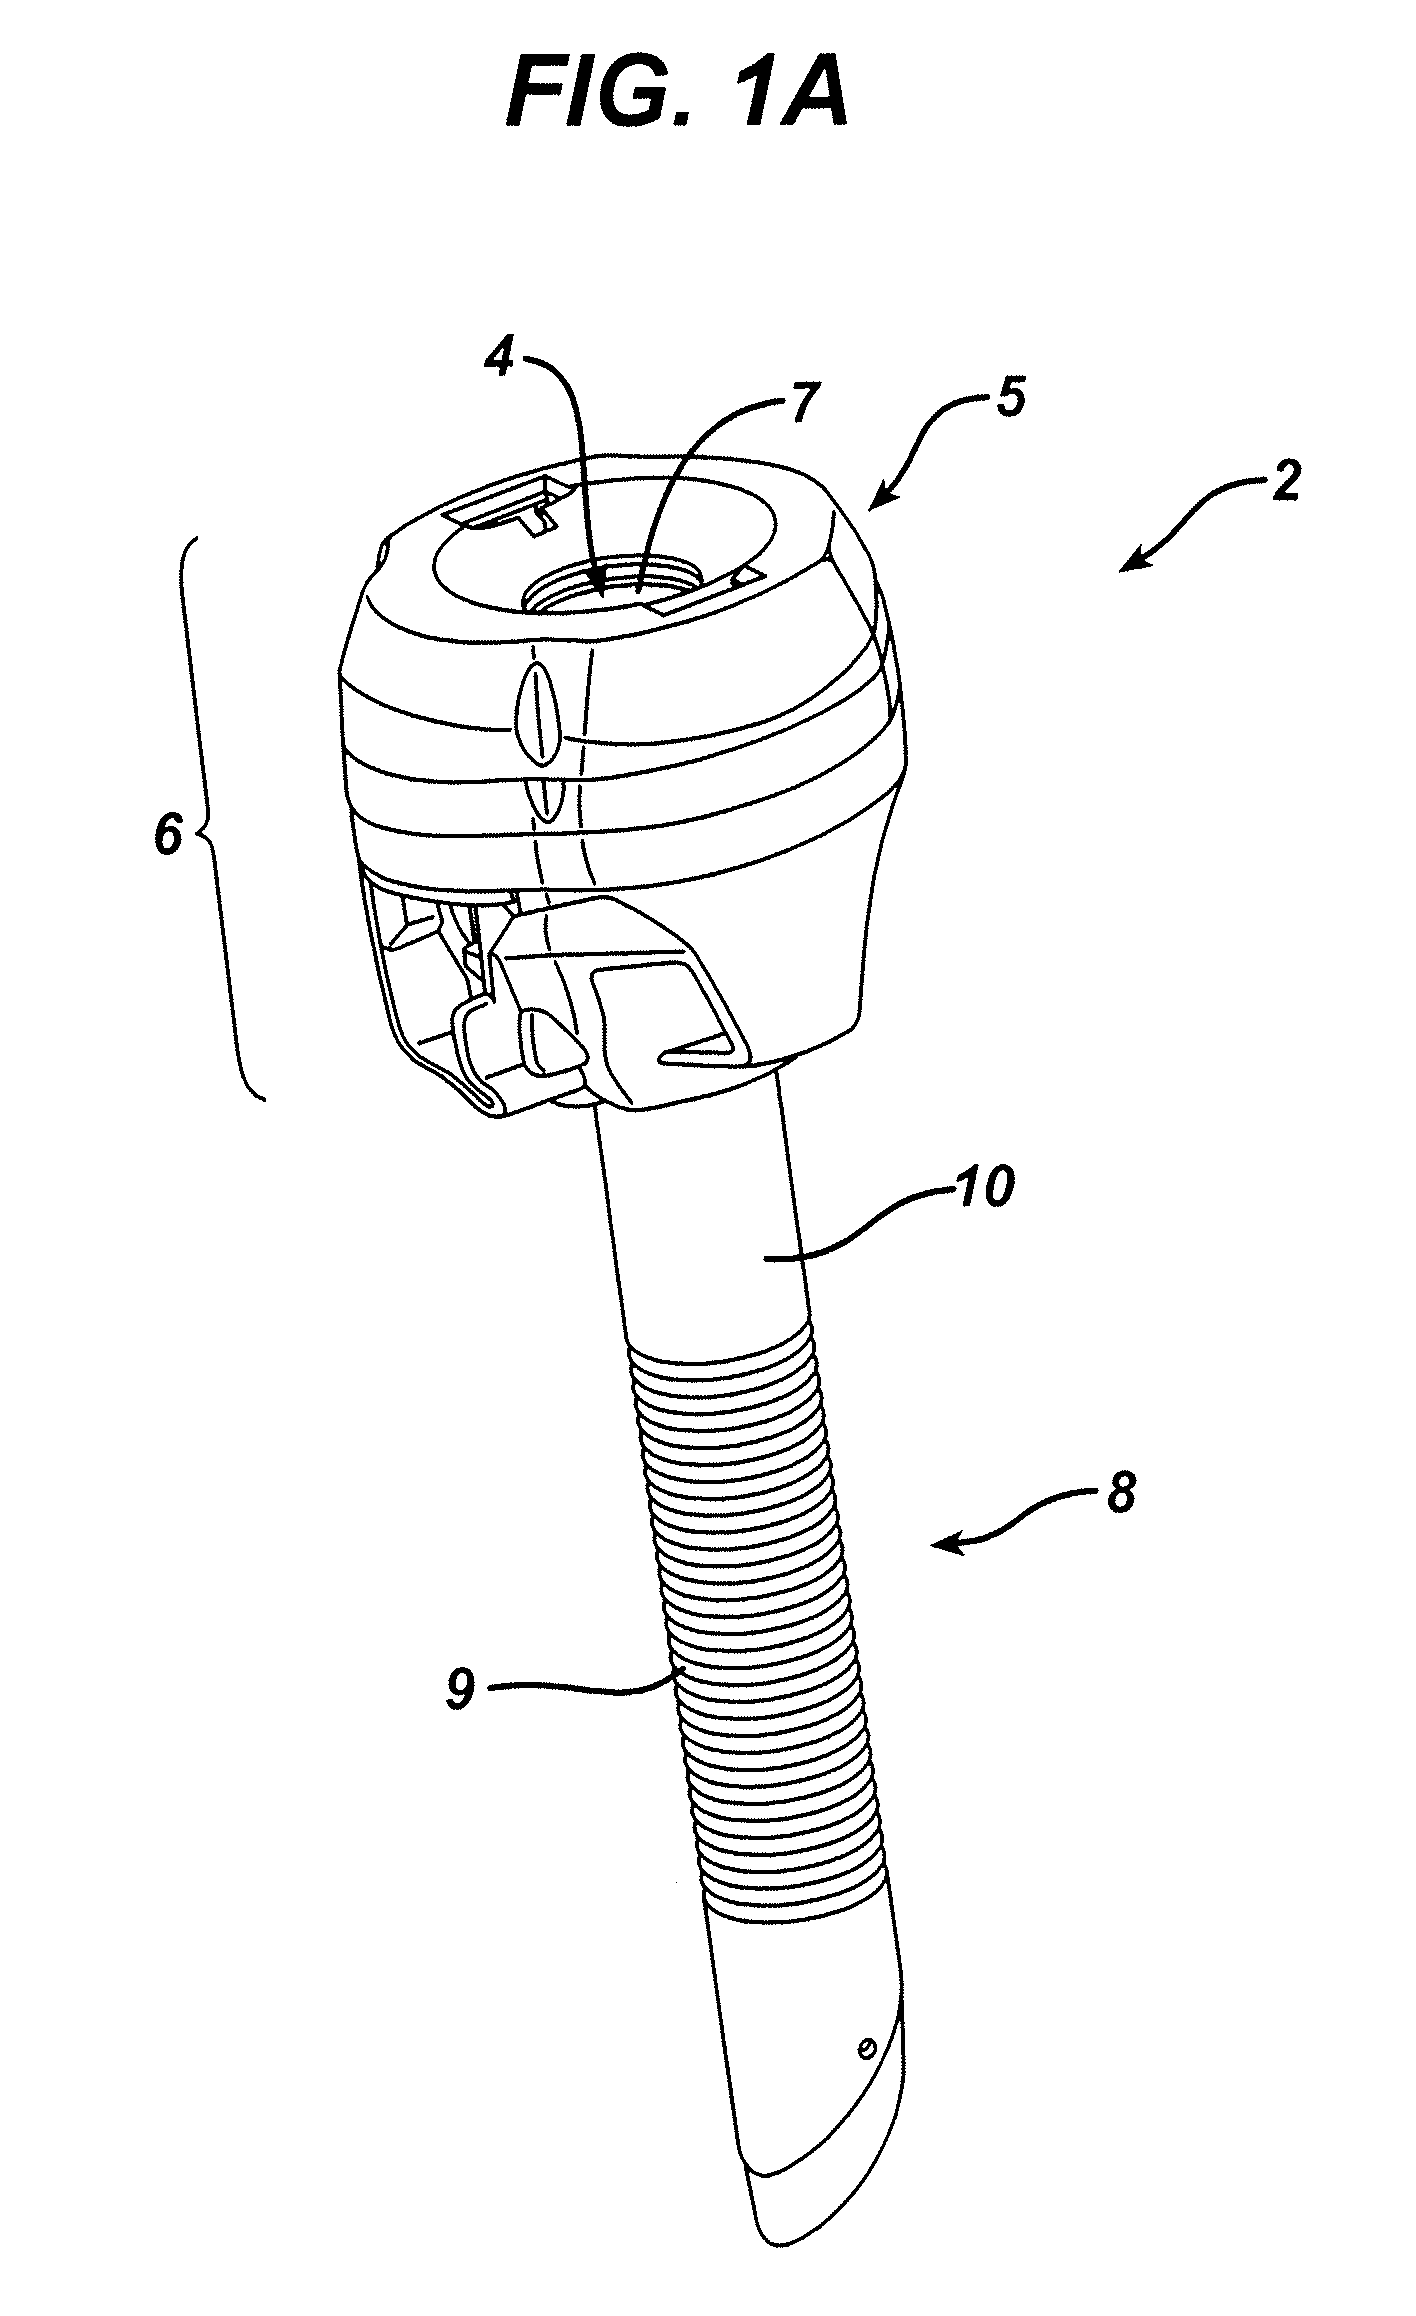 Absorbing fluids in a surgical access device